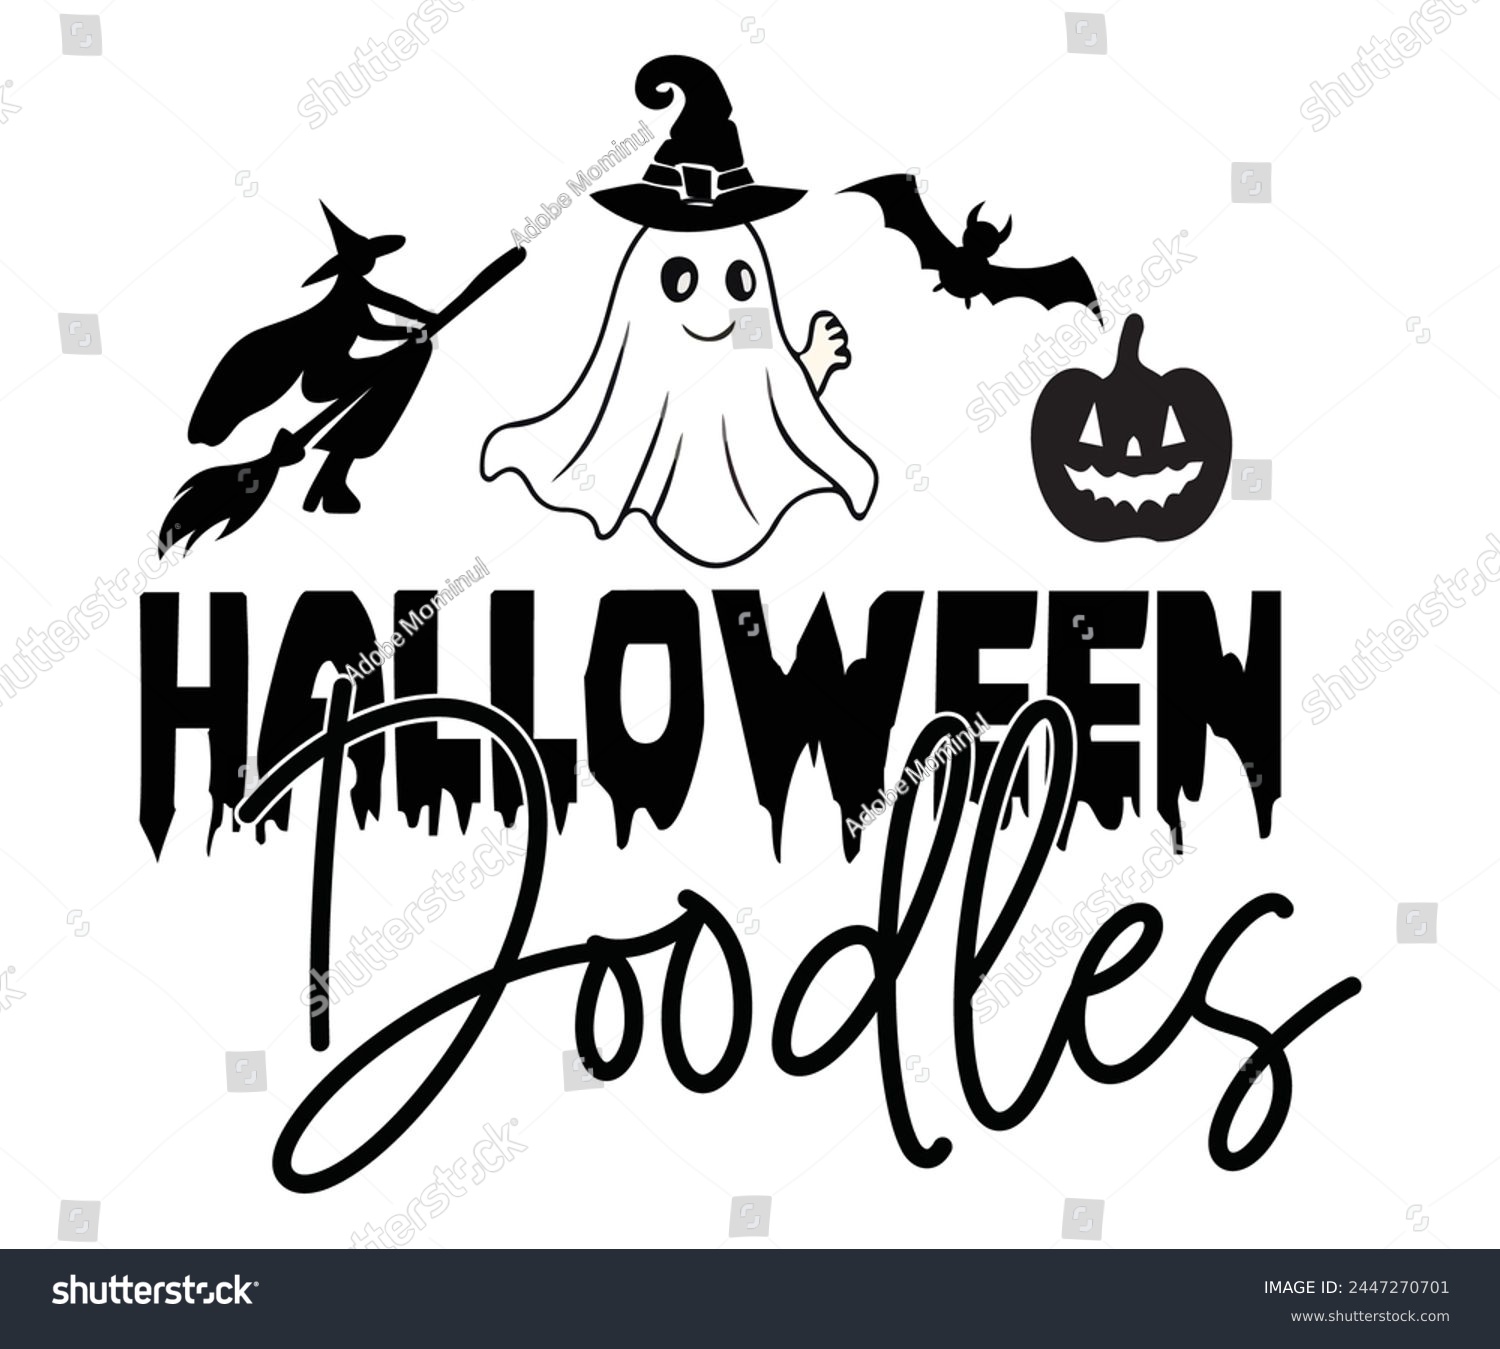 SVG of Halloween Doodles,Halloween Svg,Typography,Halloween Quotes,Witches Svg,Halloween Party,Halloween Costume,Halloween Gift,Funny Halloween,Spooky Svg,Funny T shirt,Ghost Svg,Cut file svg